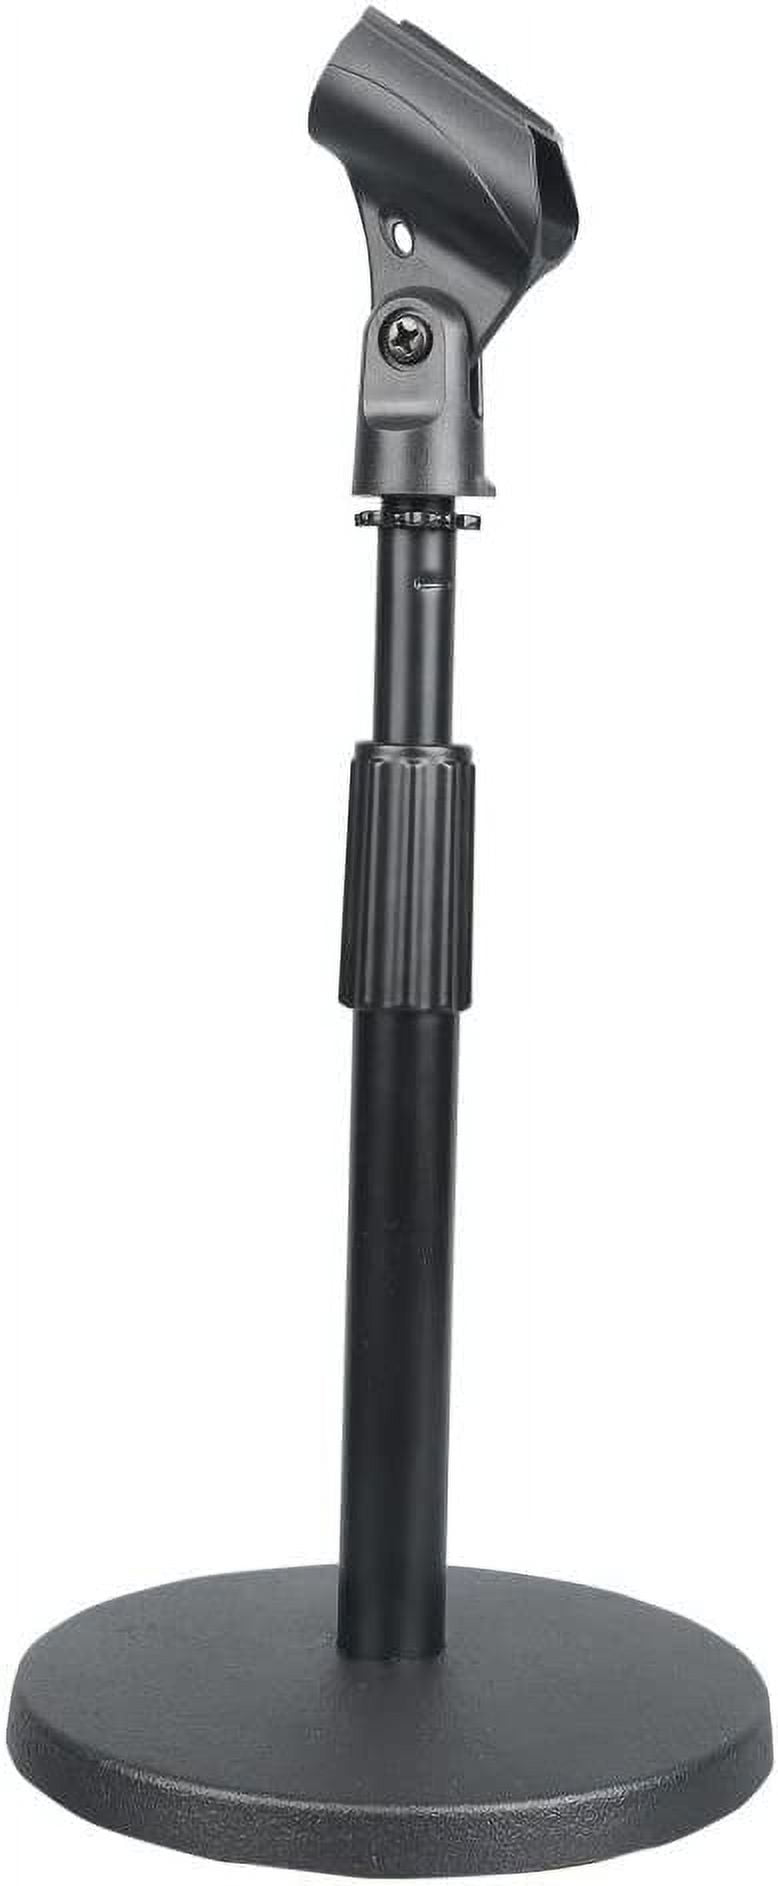  Pyle Universal Compact Base Microphone Stand - 2.8 to